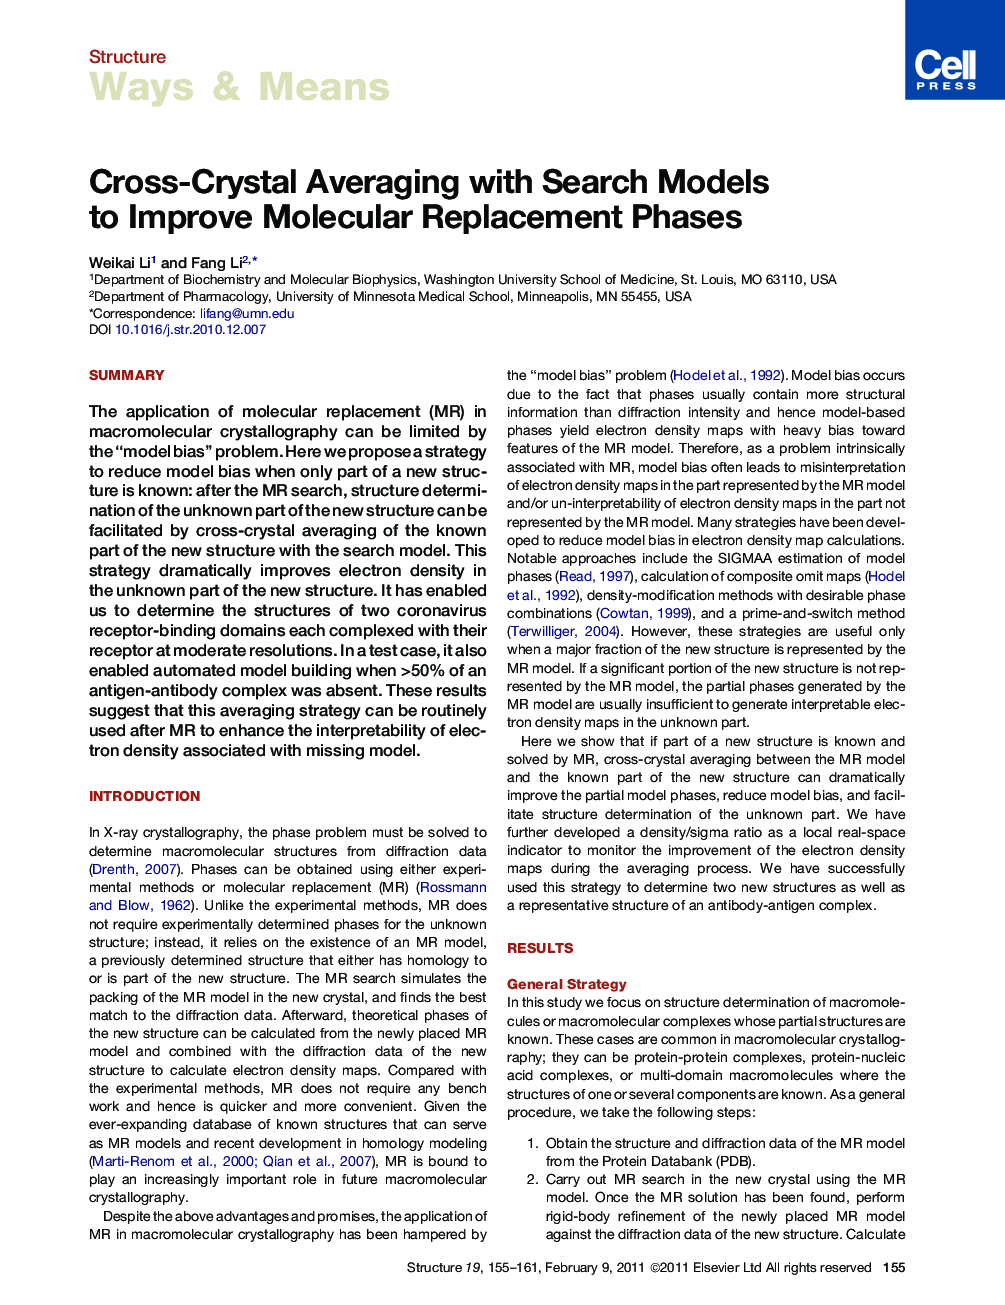 Cross-Crystal Averaging with Search Models to Improve Molecular Replacement Phases